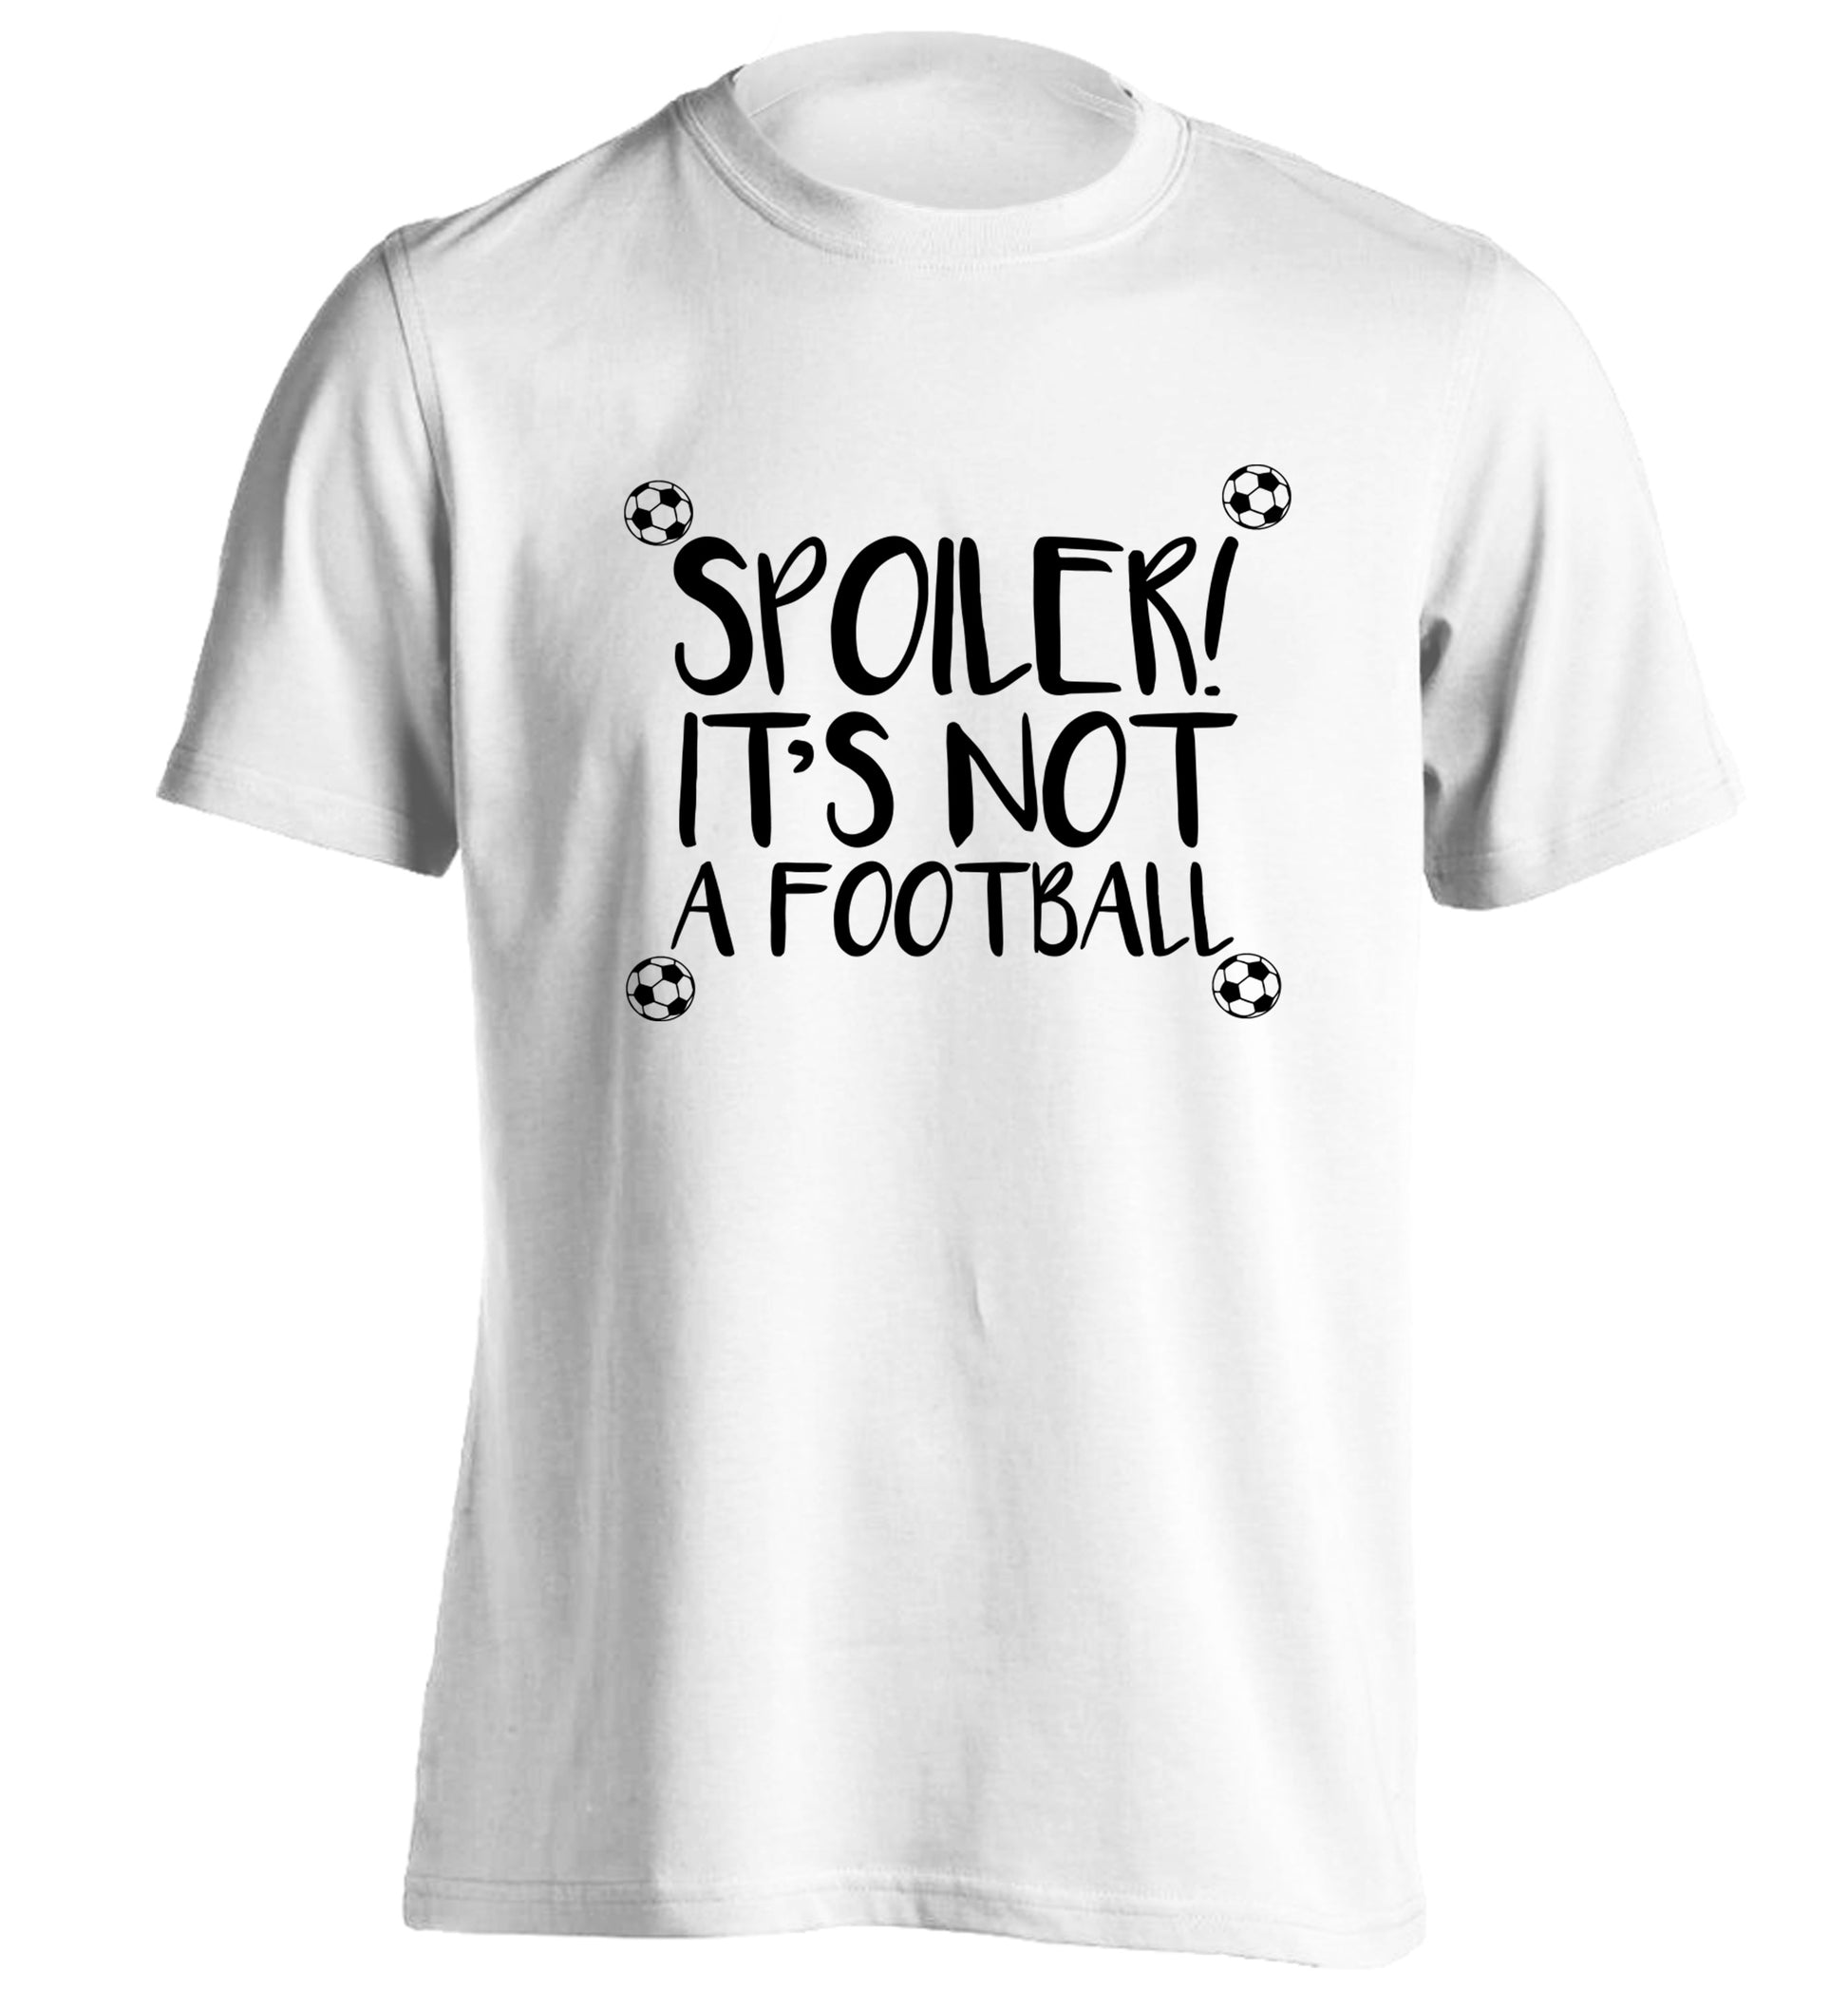 Spoiler it's not a football adults unisex white Tshirt 2XL